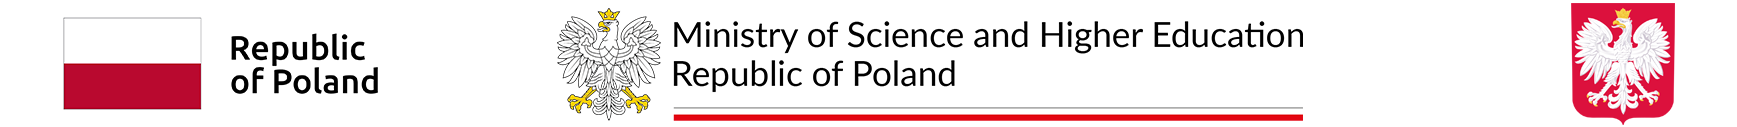 Logos: Republic of Poland, Ministry of Science and Higher Education, Poland Emblem